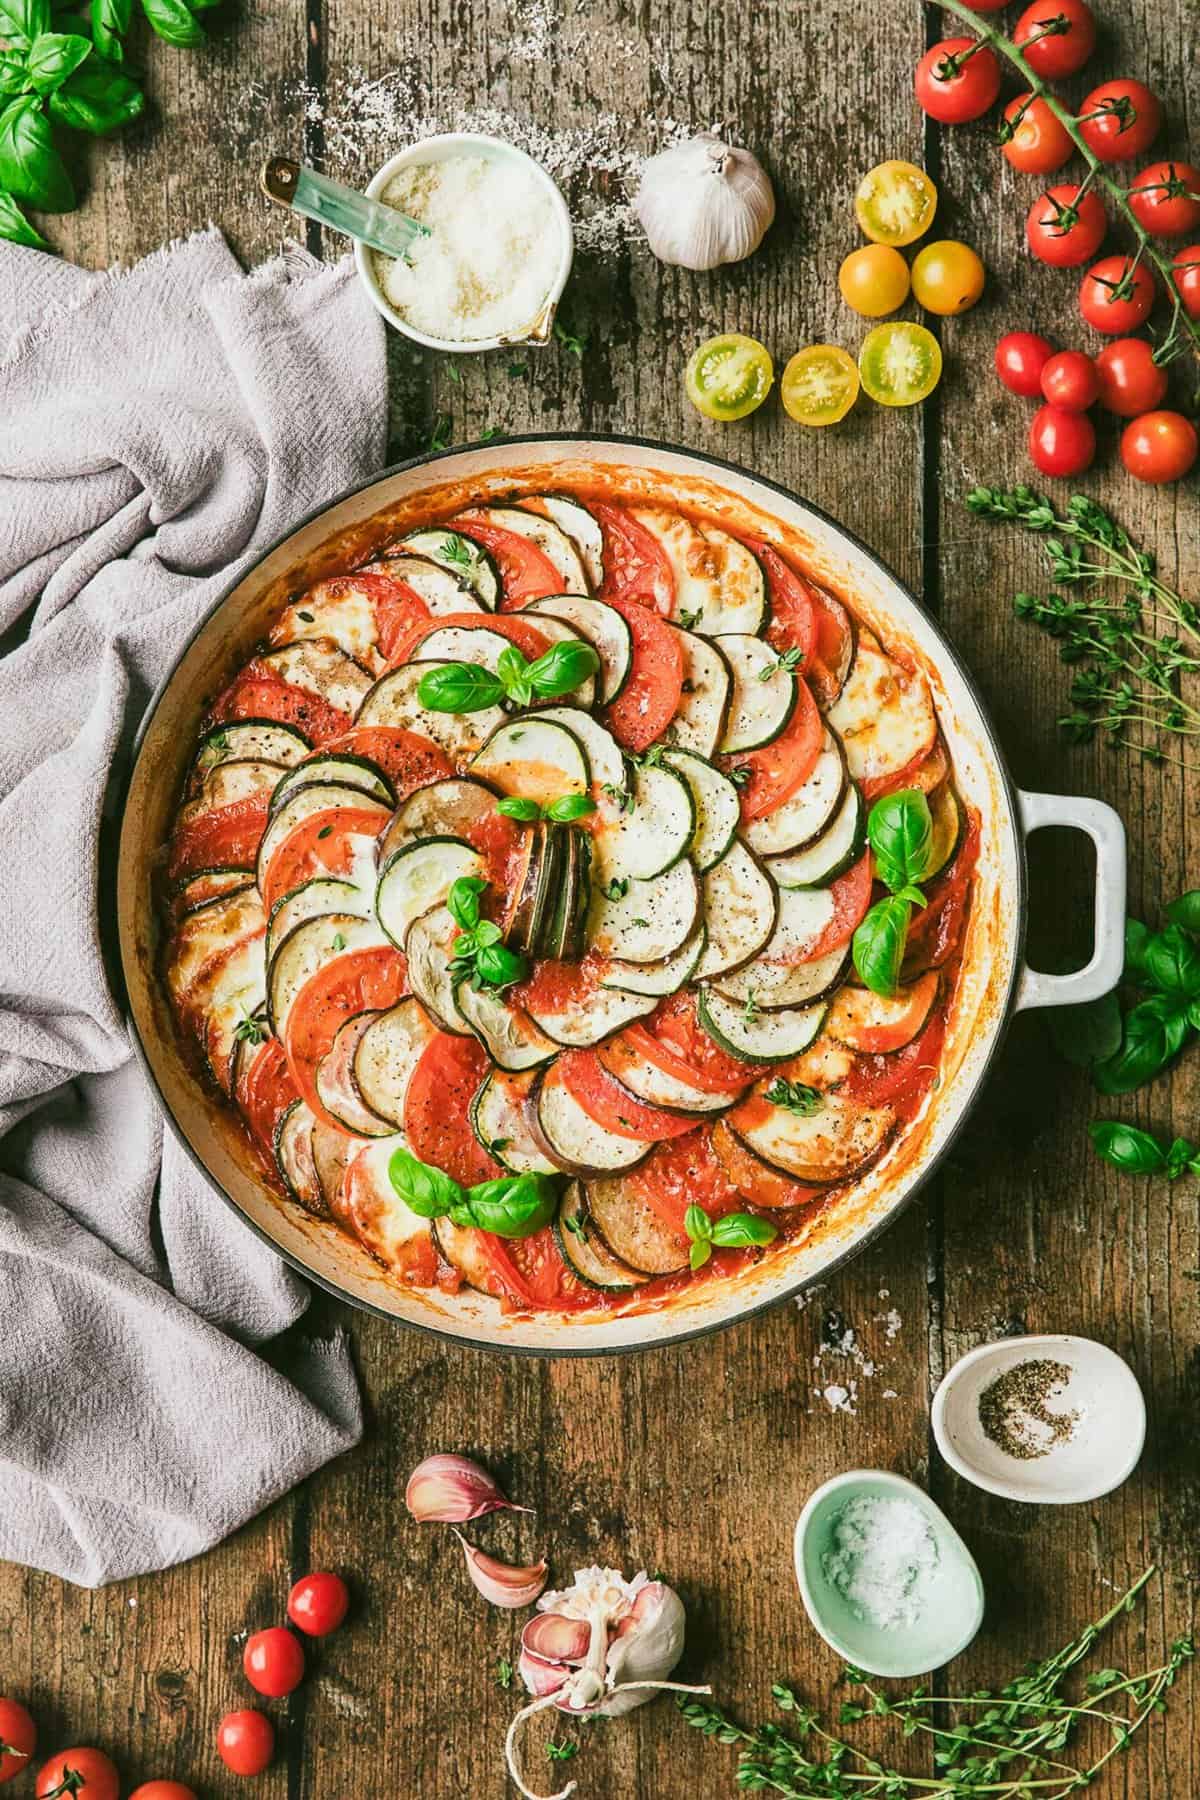 Ratatouille in round baking dish with ingredients and garnishes on tabletop